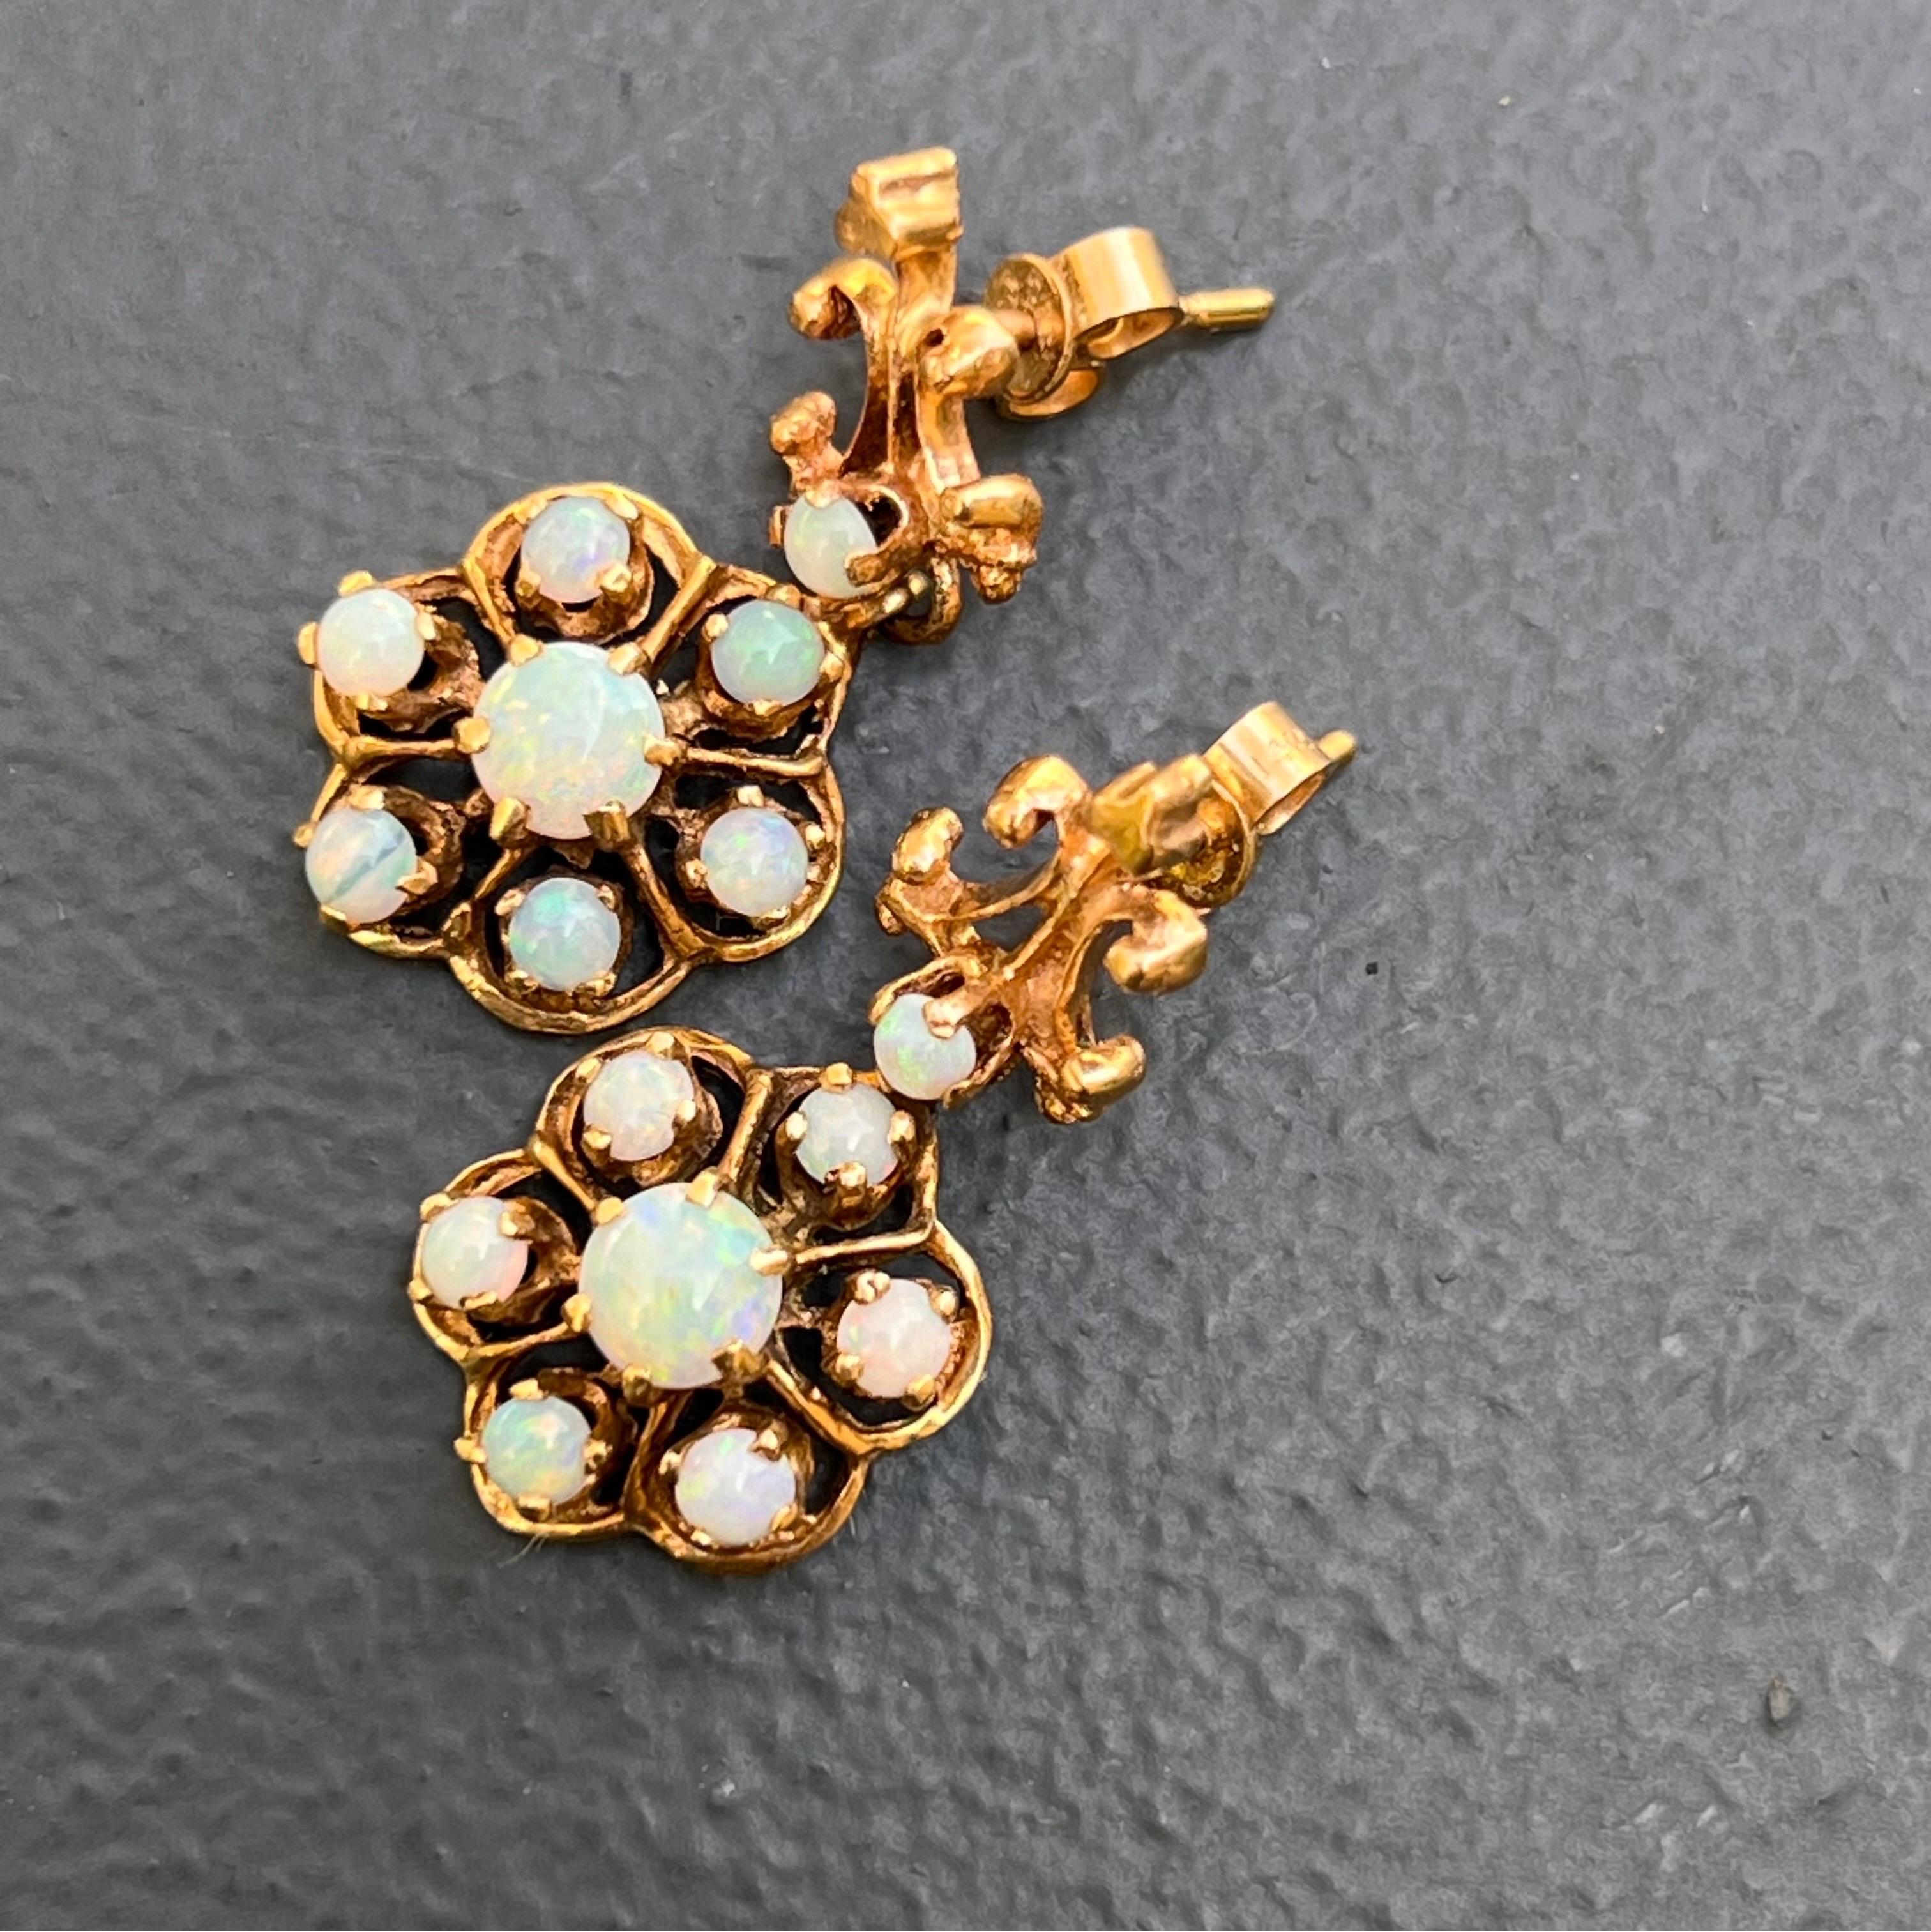 Gold Opal dangle Earrings Pireced ears Victorian revival jewelry  In Good Condition For Sale In Plainsboro, NJ